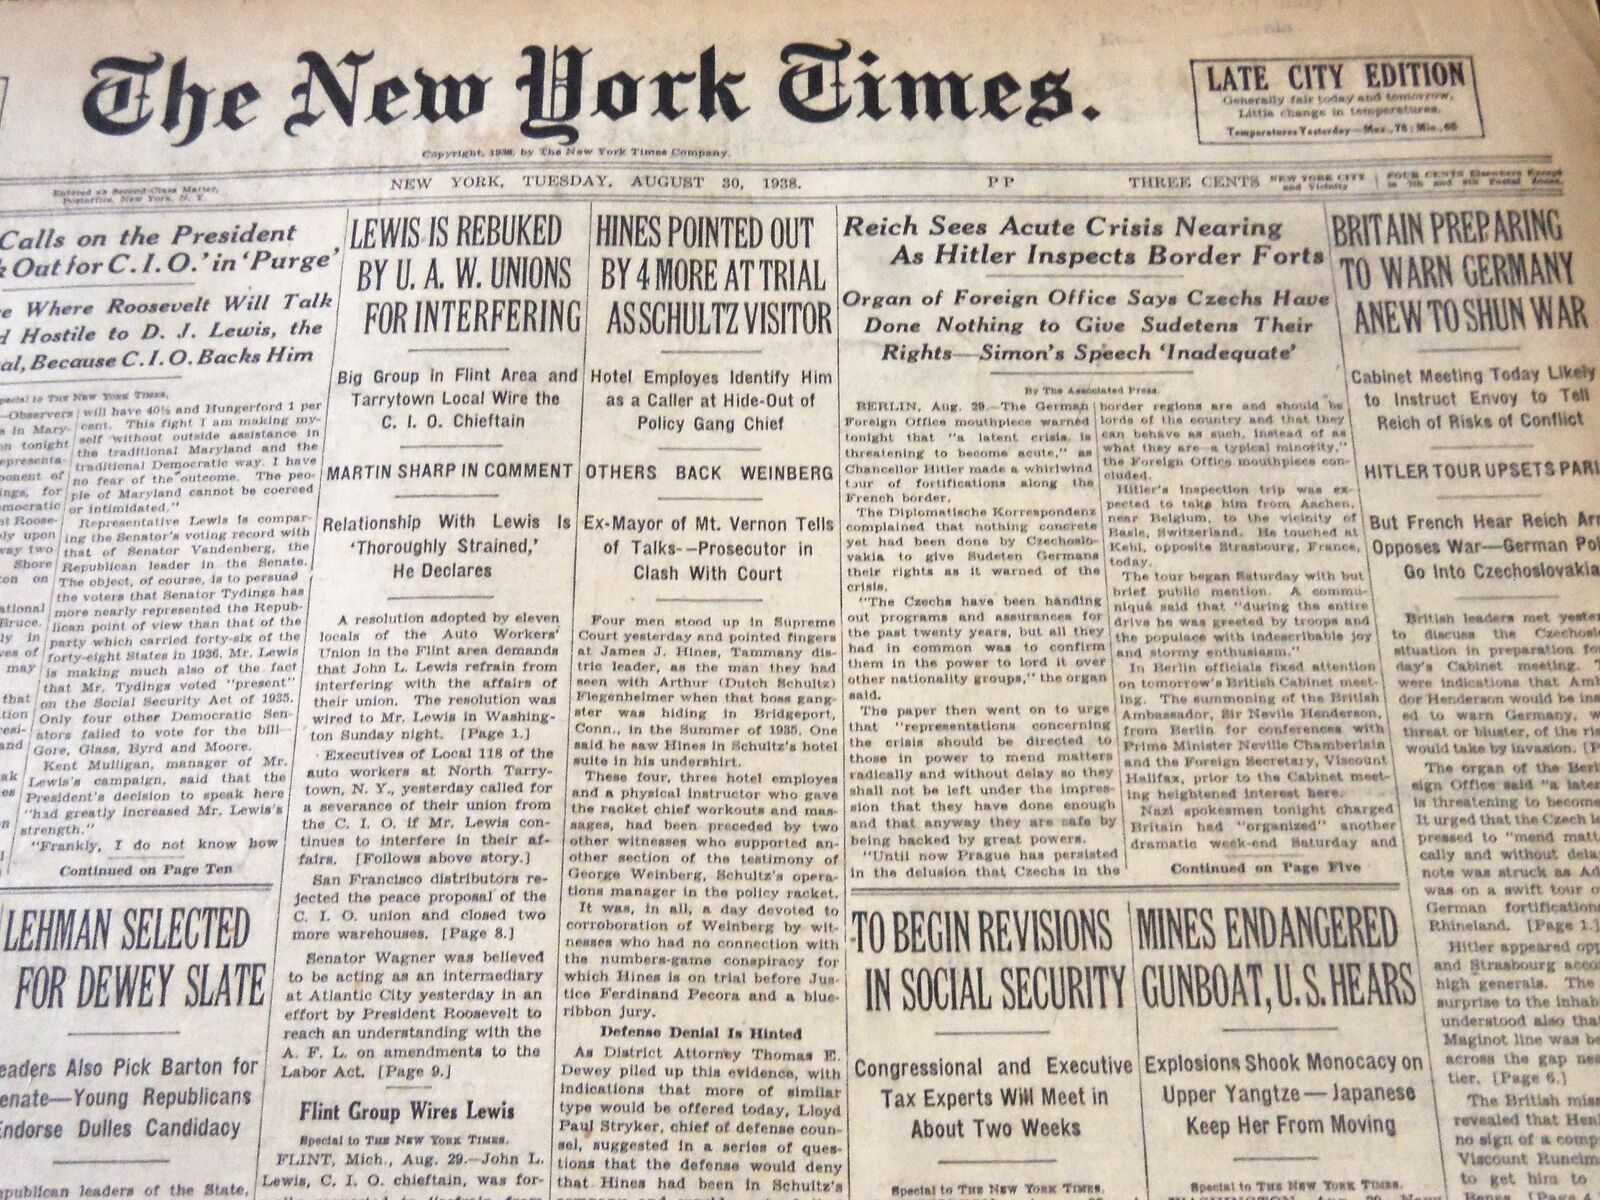 1938 AUGUST 30 NEW YORK TIMES - REICH SEES ACUTE CRISIS NEARING - NT 6256